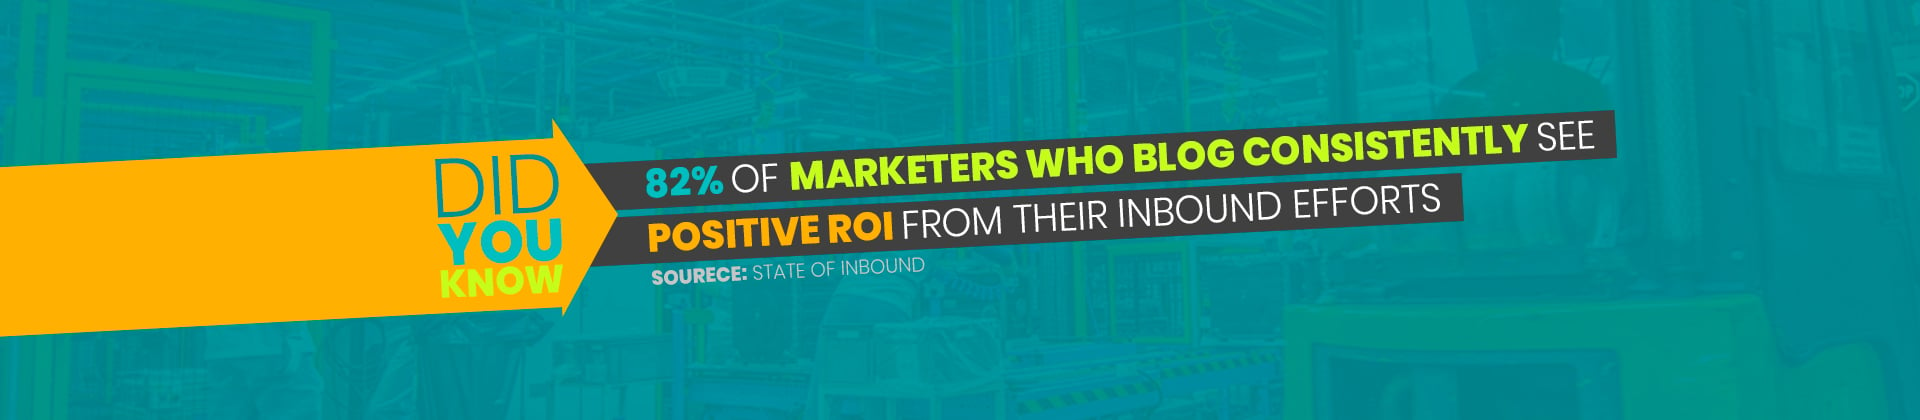 82% of marketers who blog consistently see  positive ROI from their inbound efforts